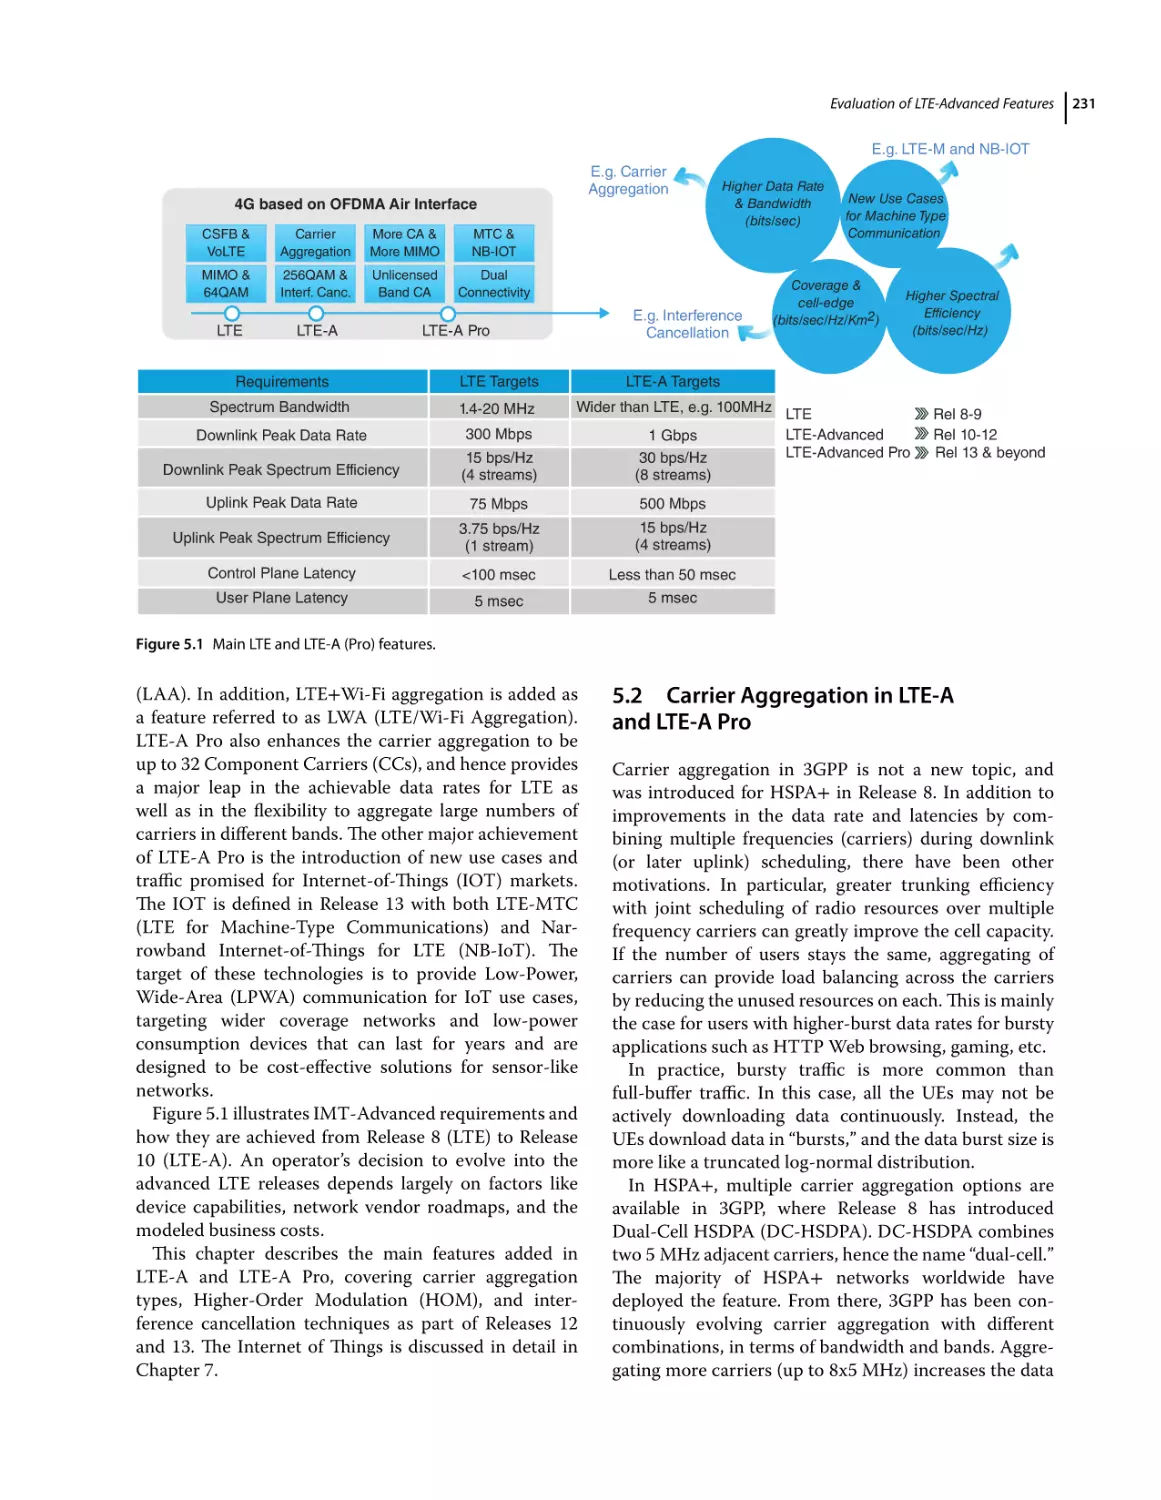 5.2 Carrier Aggregation in LTE‐A and LTE‐A Pro